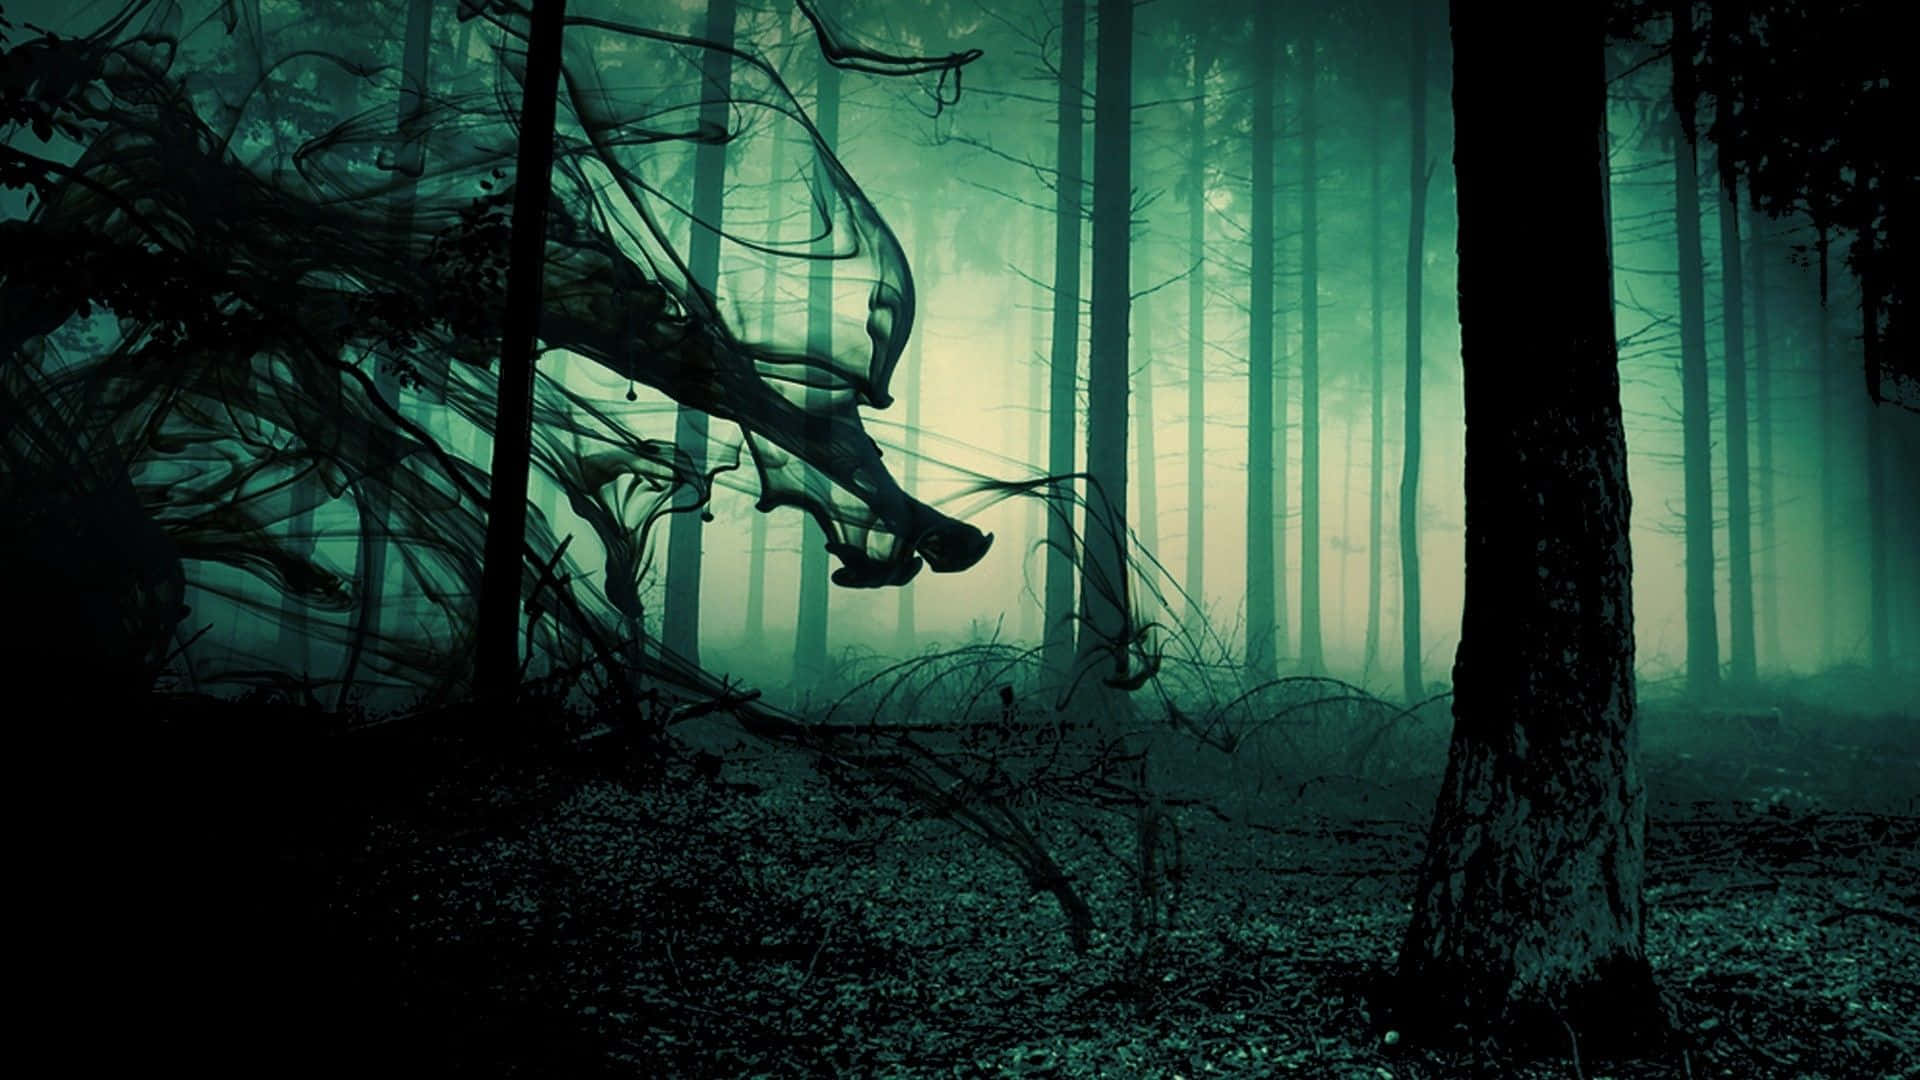 Enter The Forbidden Forest at Your Own Risk Wallpaper